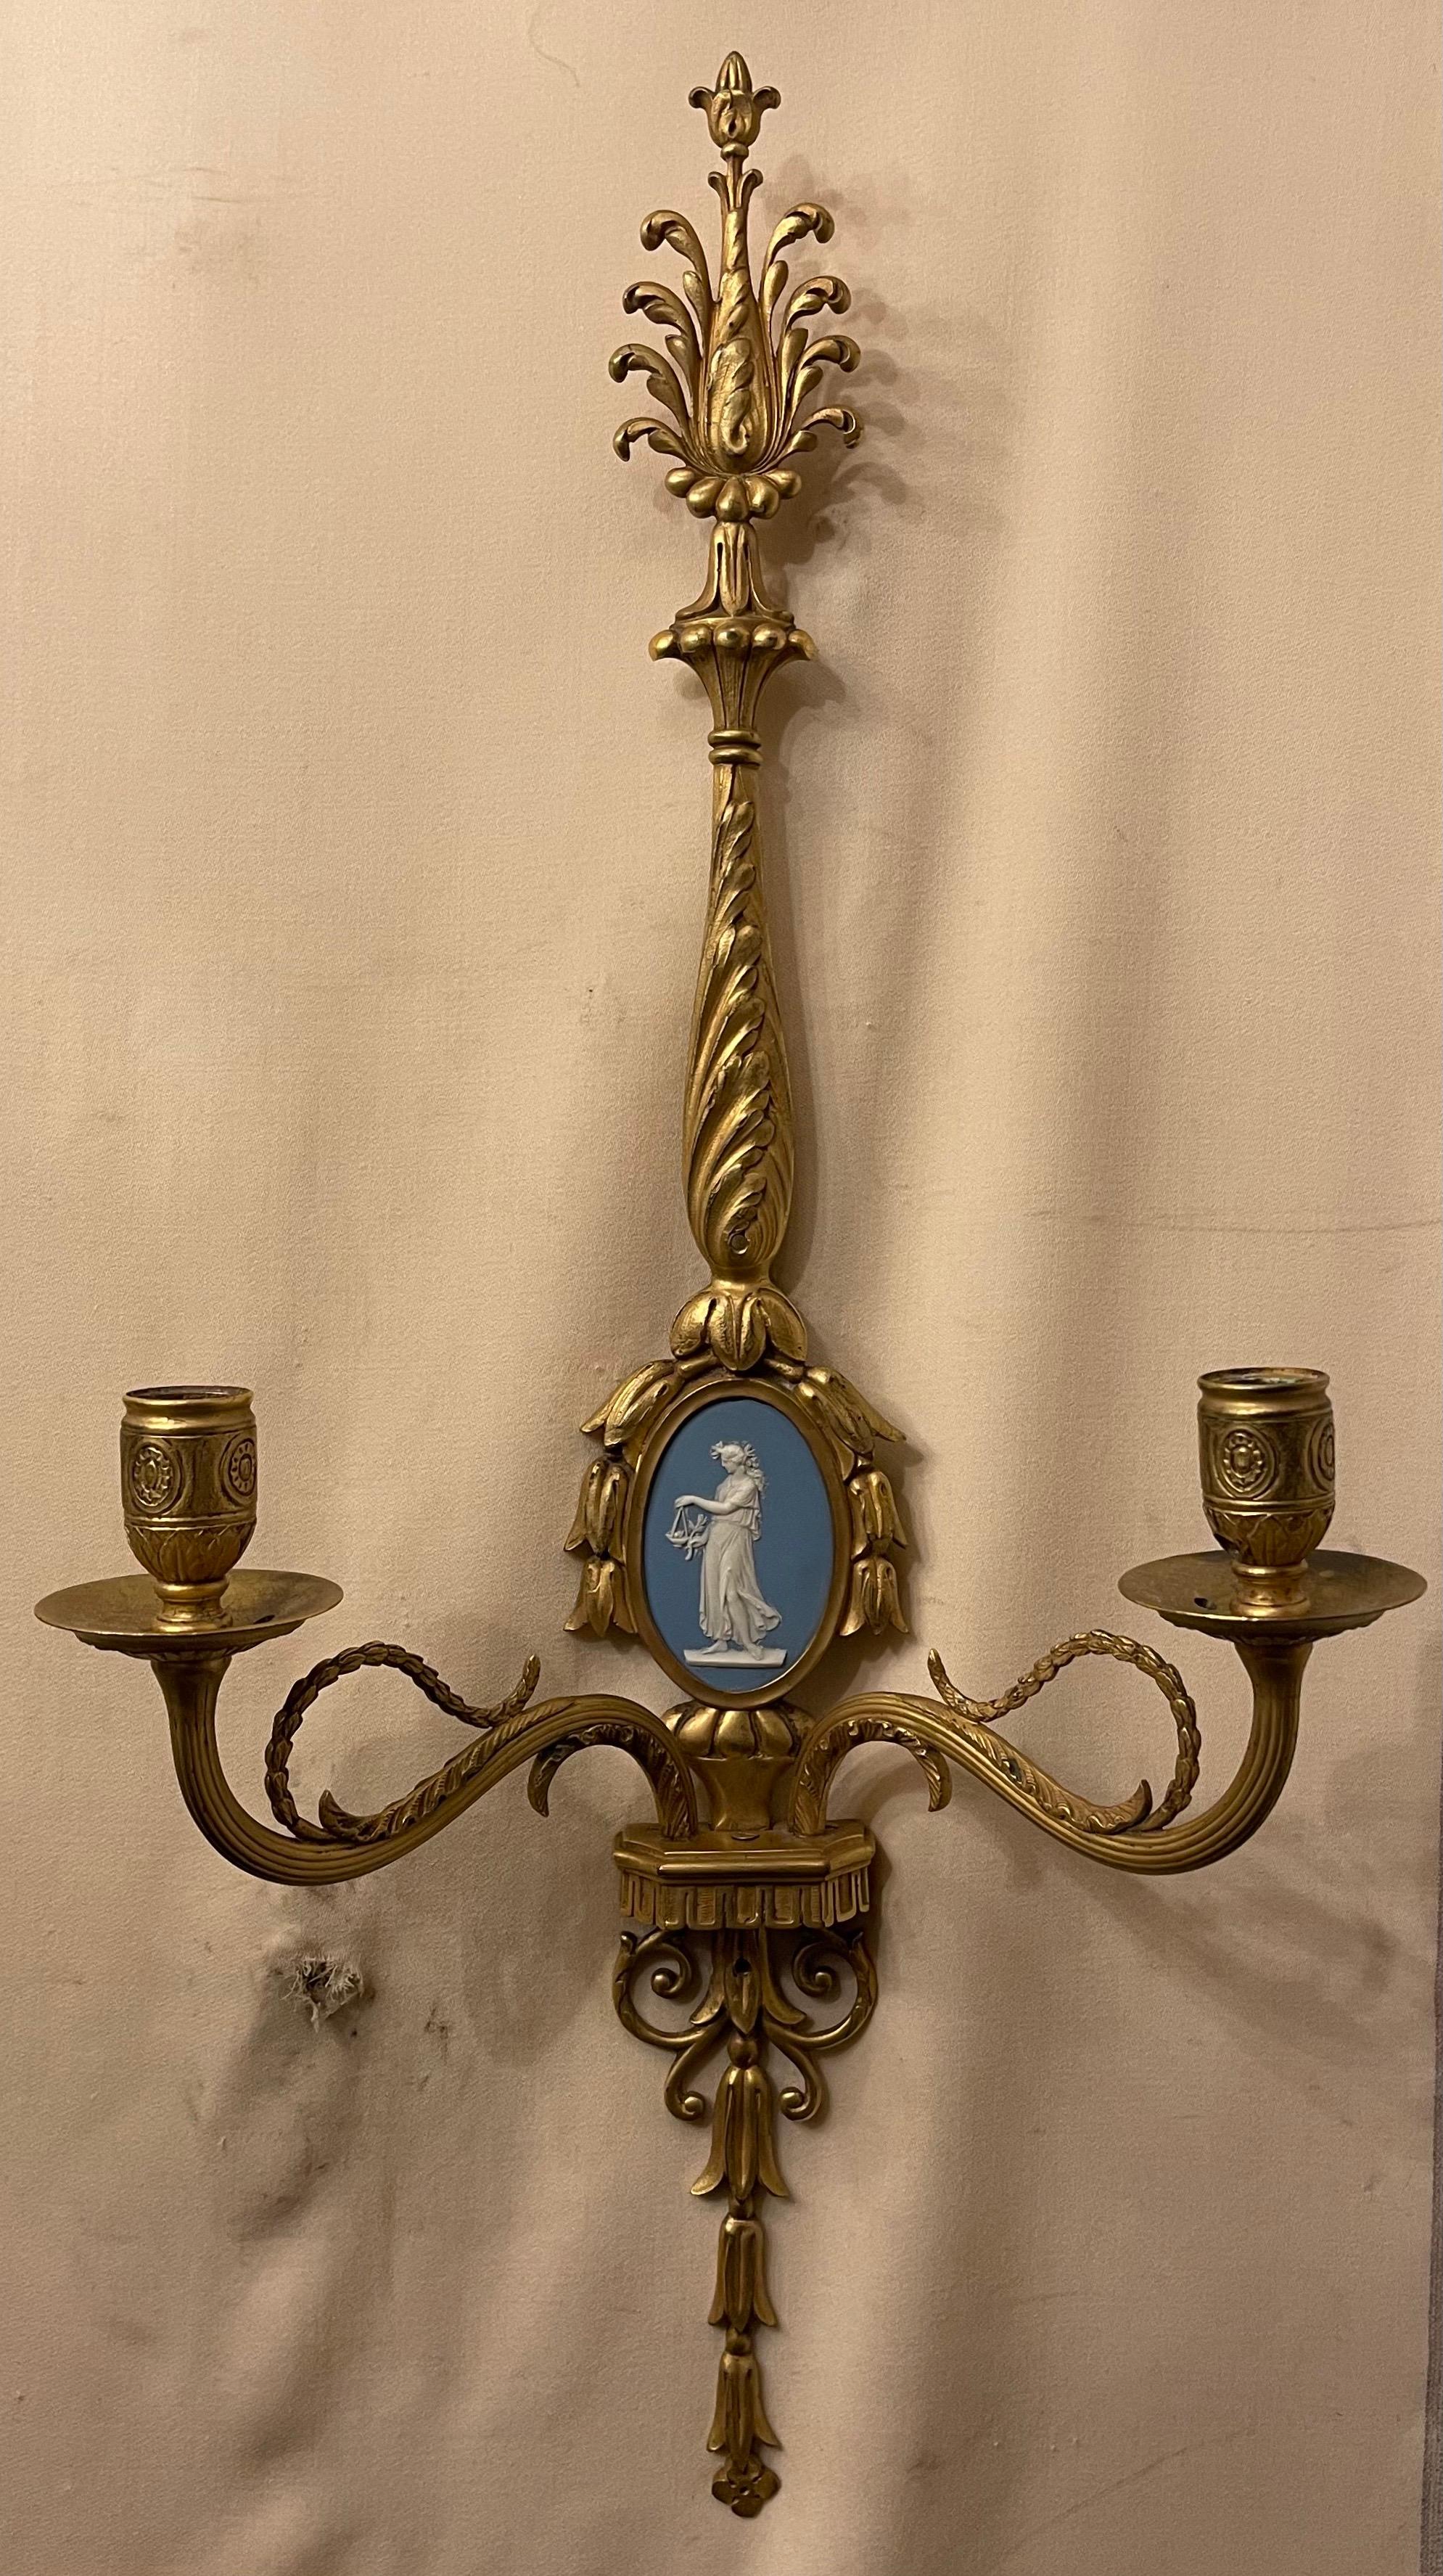 A wonderful pair of French Louis XVI style dore bronze & Wedgwood plaque two arm sconces in the manner of E. F. Caldwell.
Wiring is available at no additional charge.